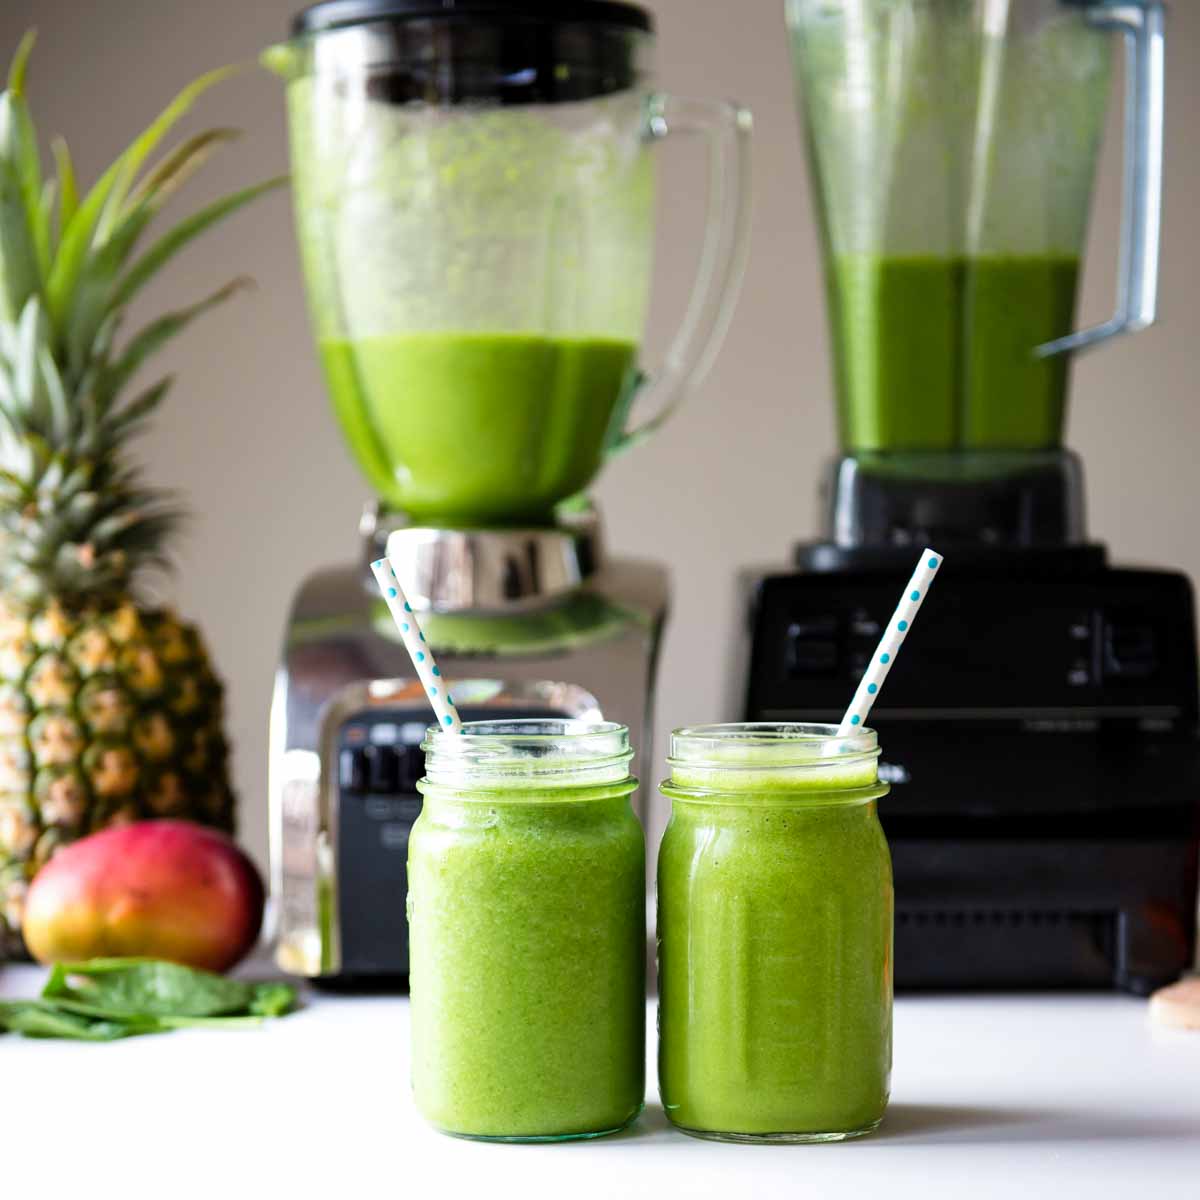 10 Best Blenders for - Simple Green Smoothies